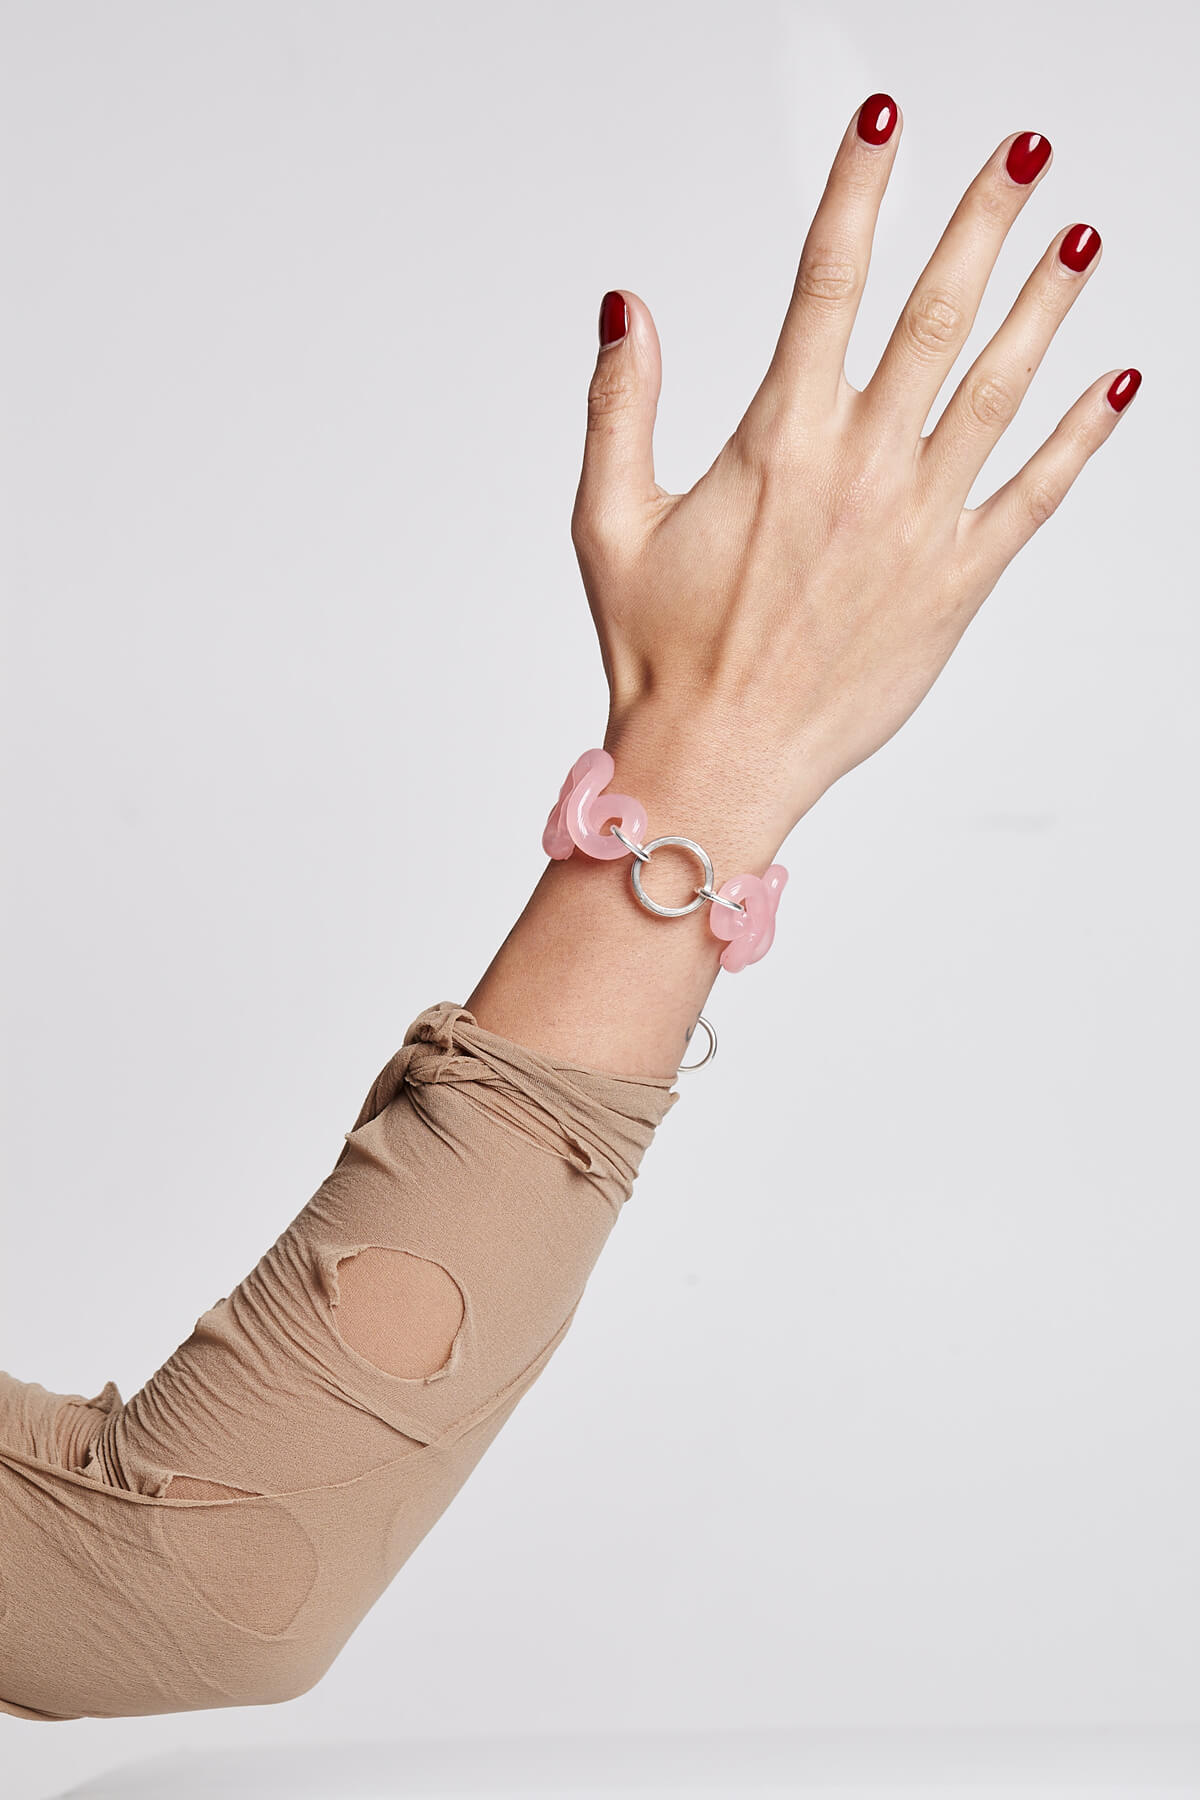 Outstretched arm with pink bracelet.